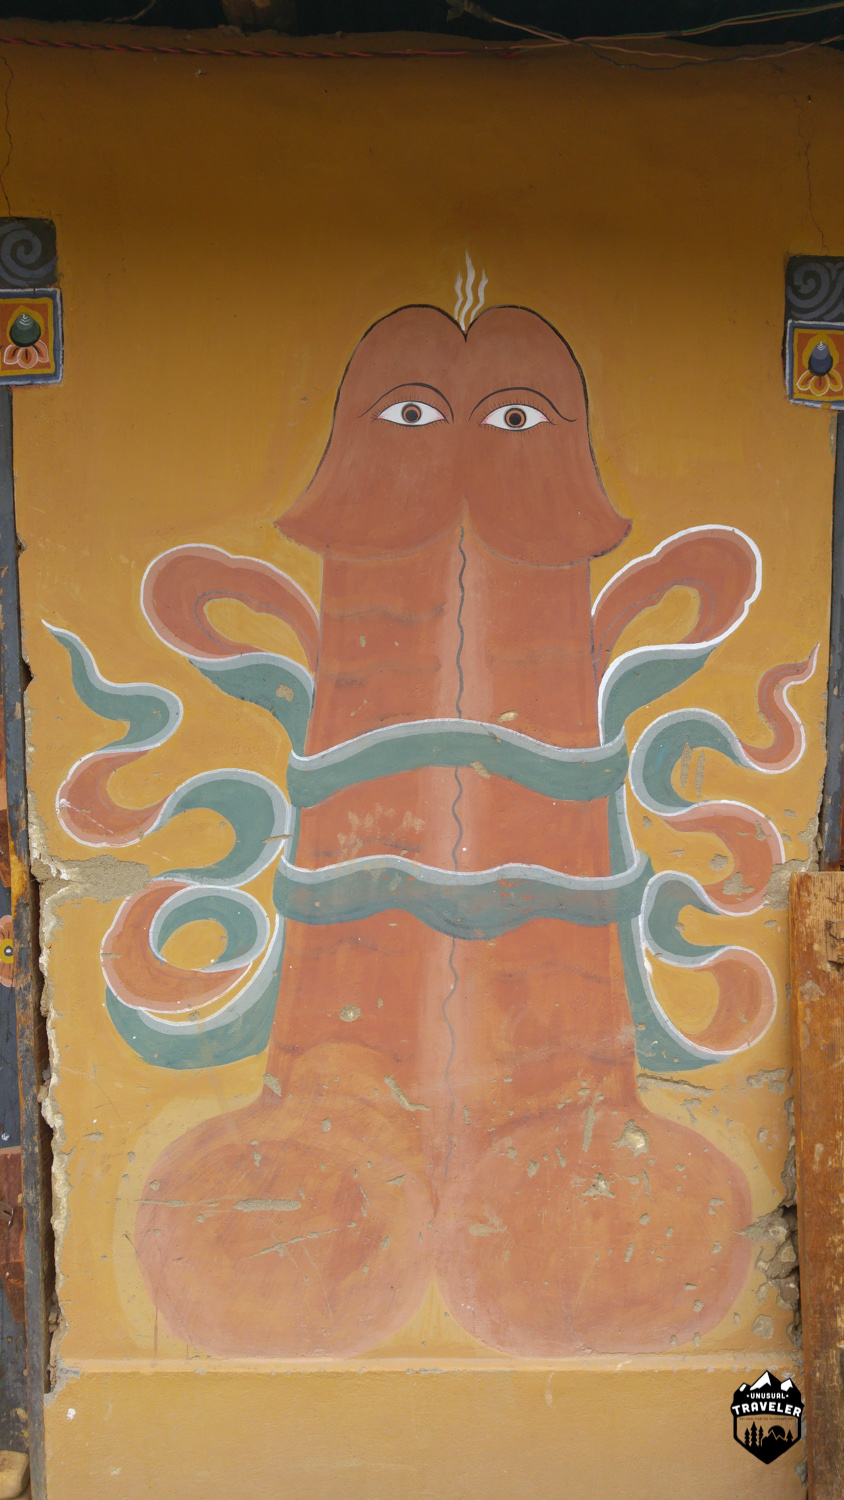 It is symbolic of the teachings of Drukpa Kunley, an eccentric saint who travelled in Bhutan